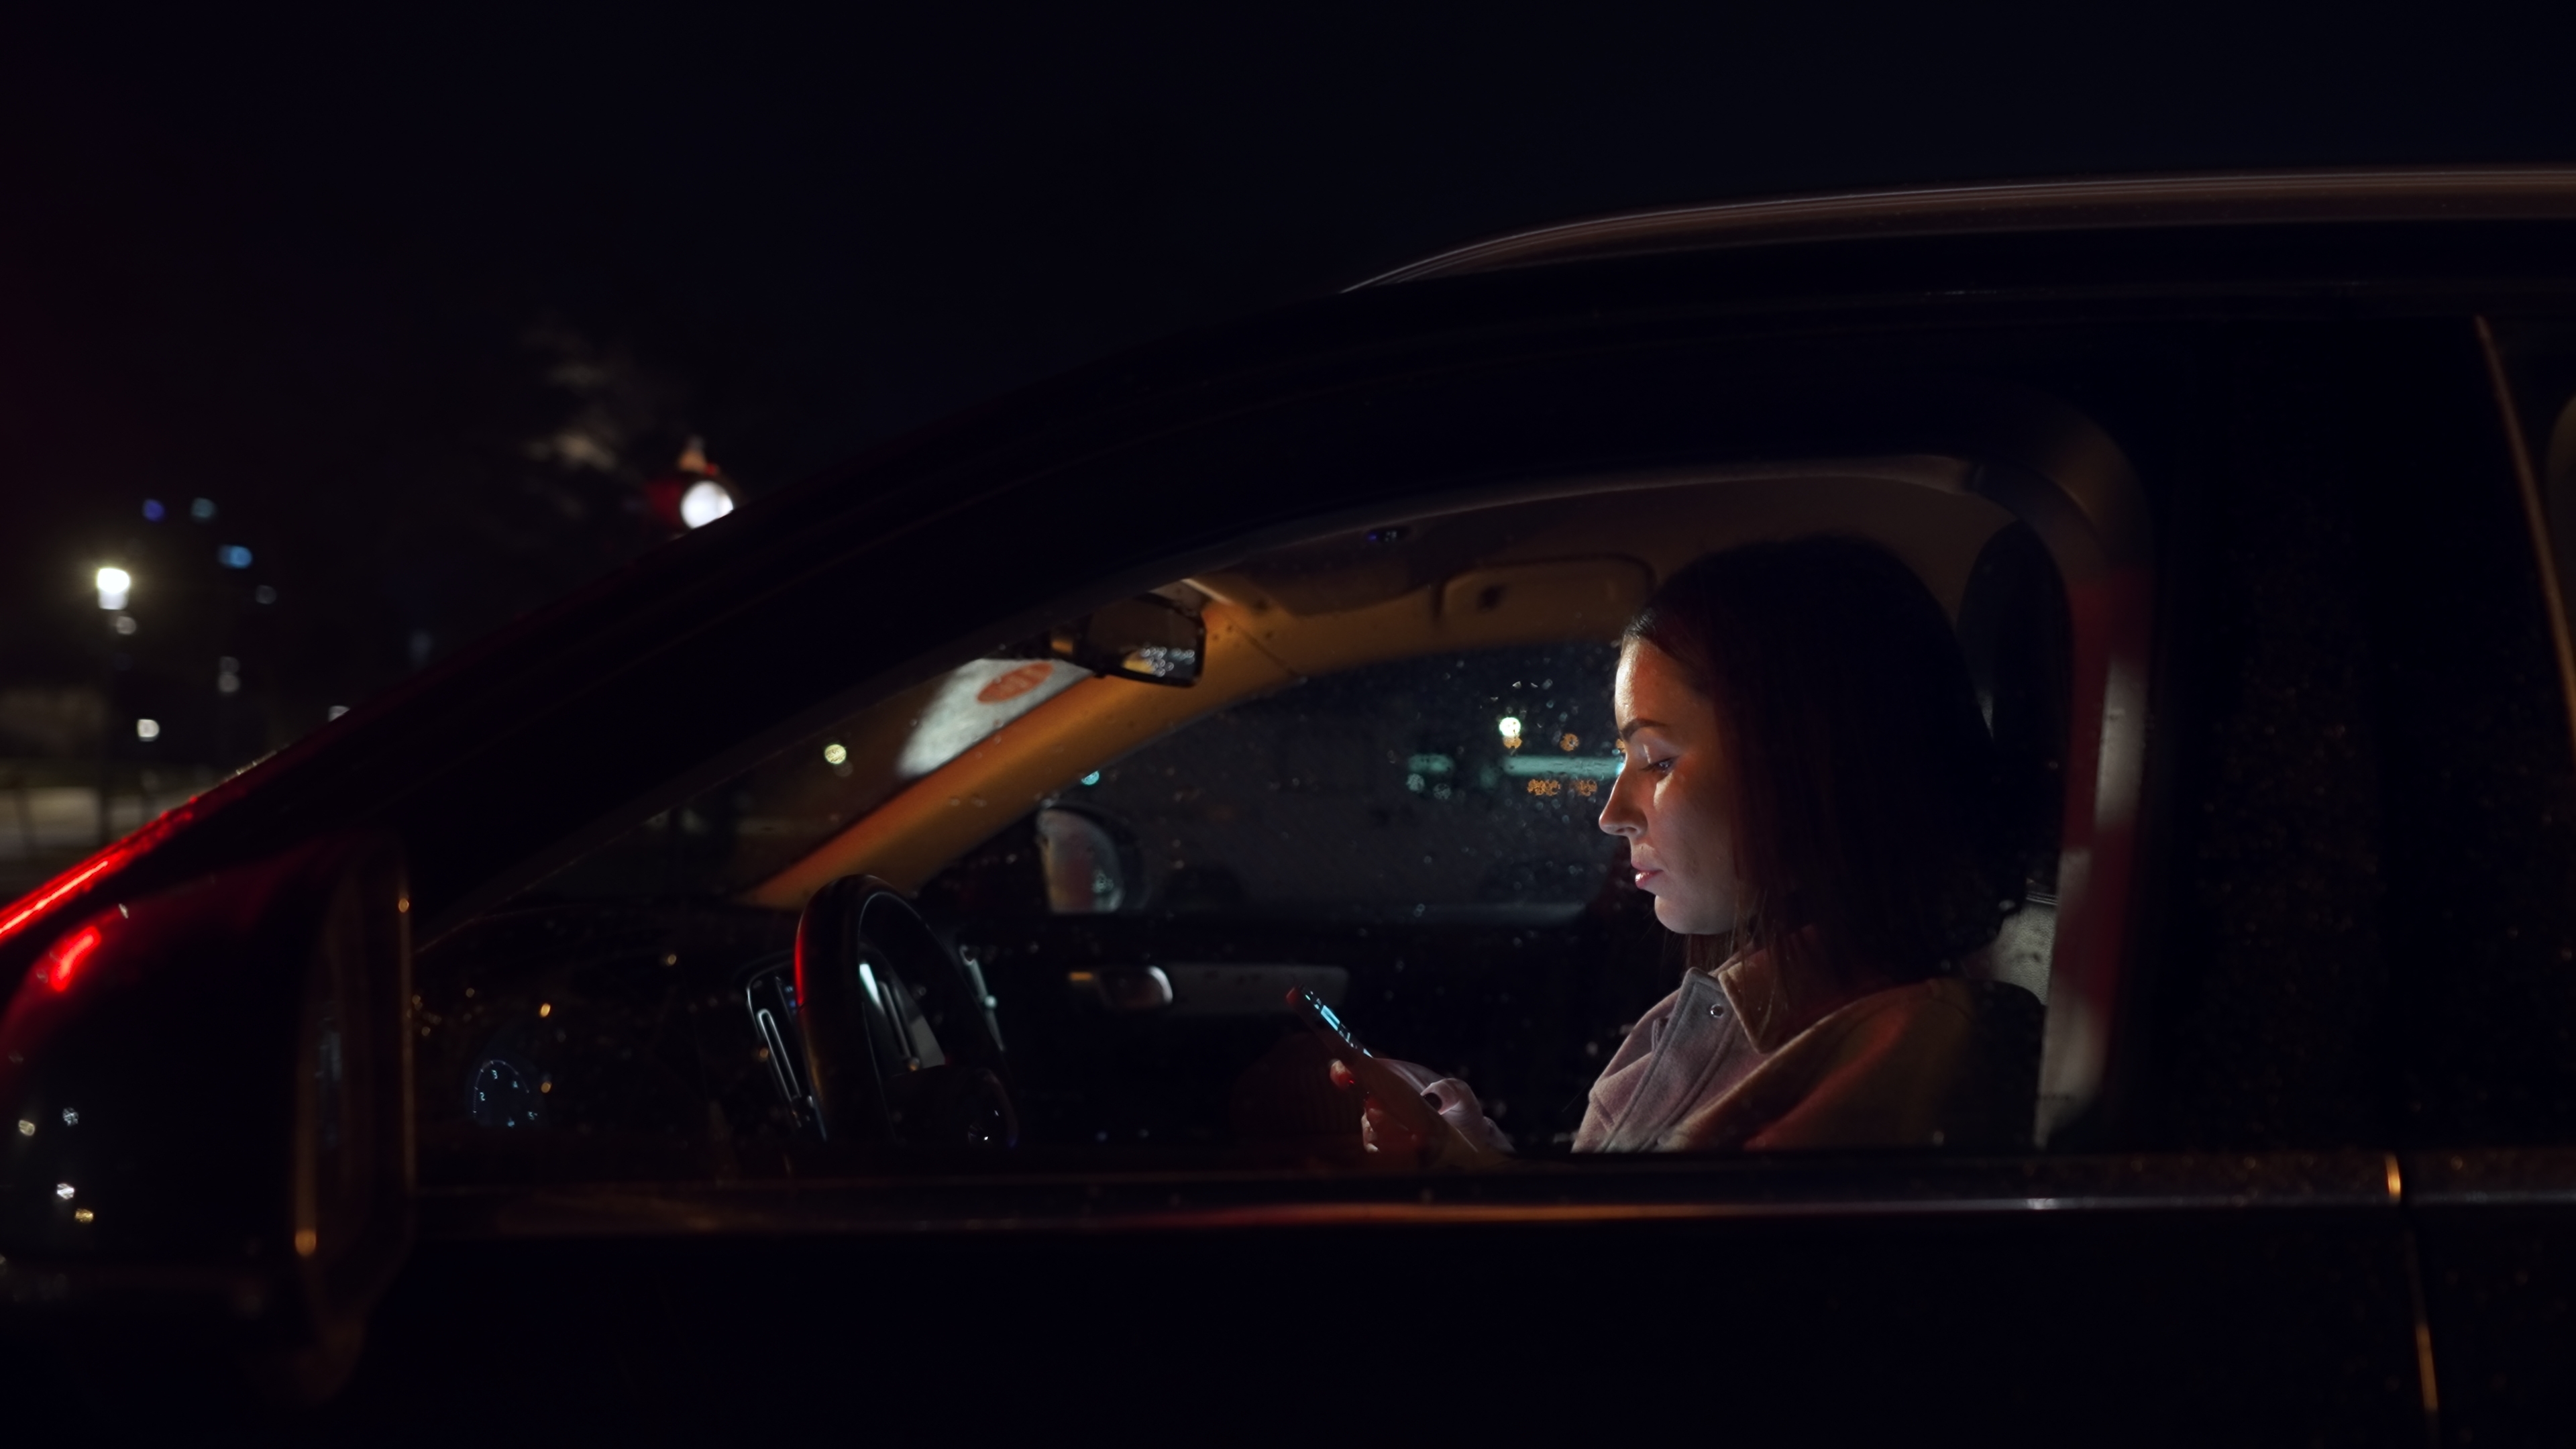 Woman using her smartphone inside a car at night | Source: Shutterstock